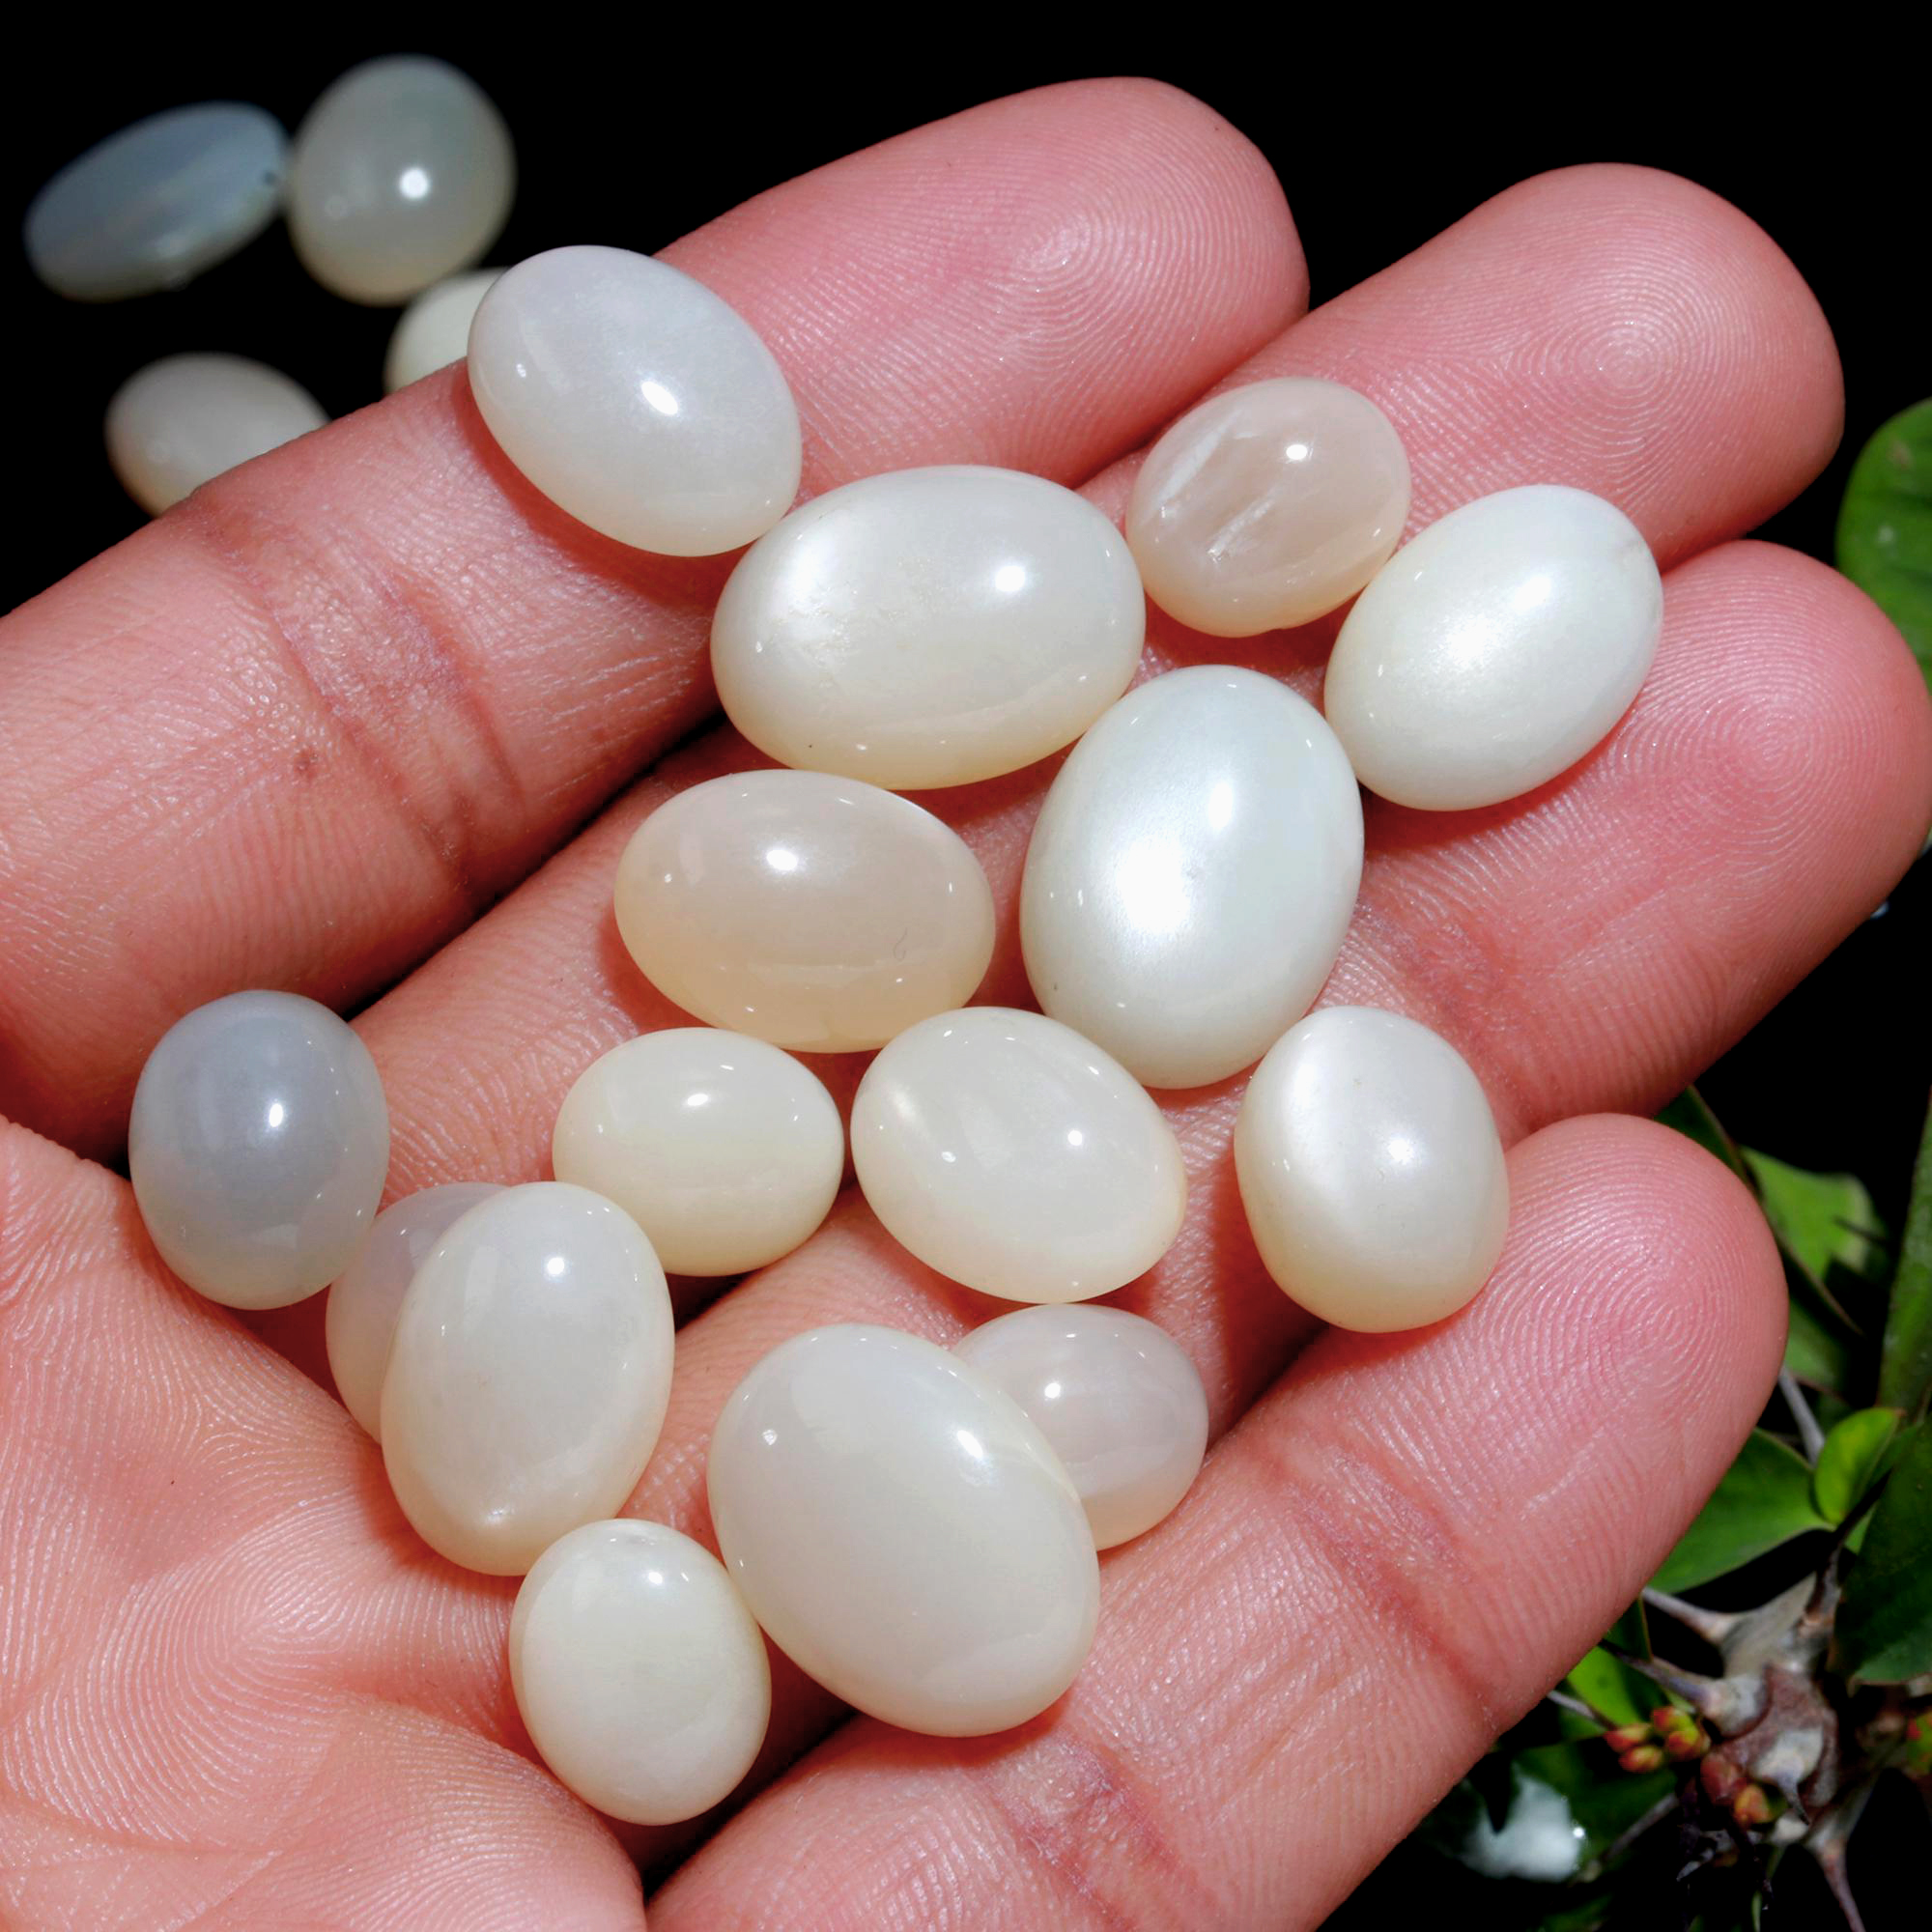 28 Pcs. 152Cts. Natural White Rainbow Moonstone polished Mix Cabochon Wholesale Loose Lot Size 16x12 12x9mm Gemstone for jewelry